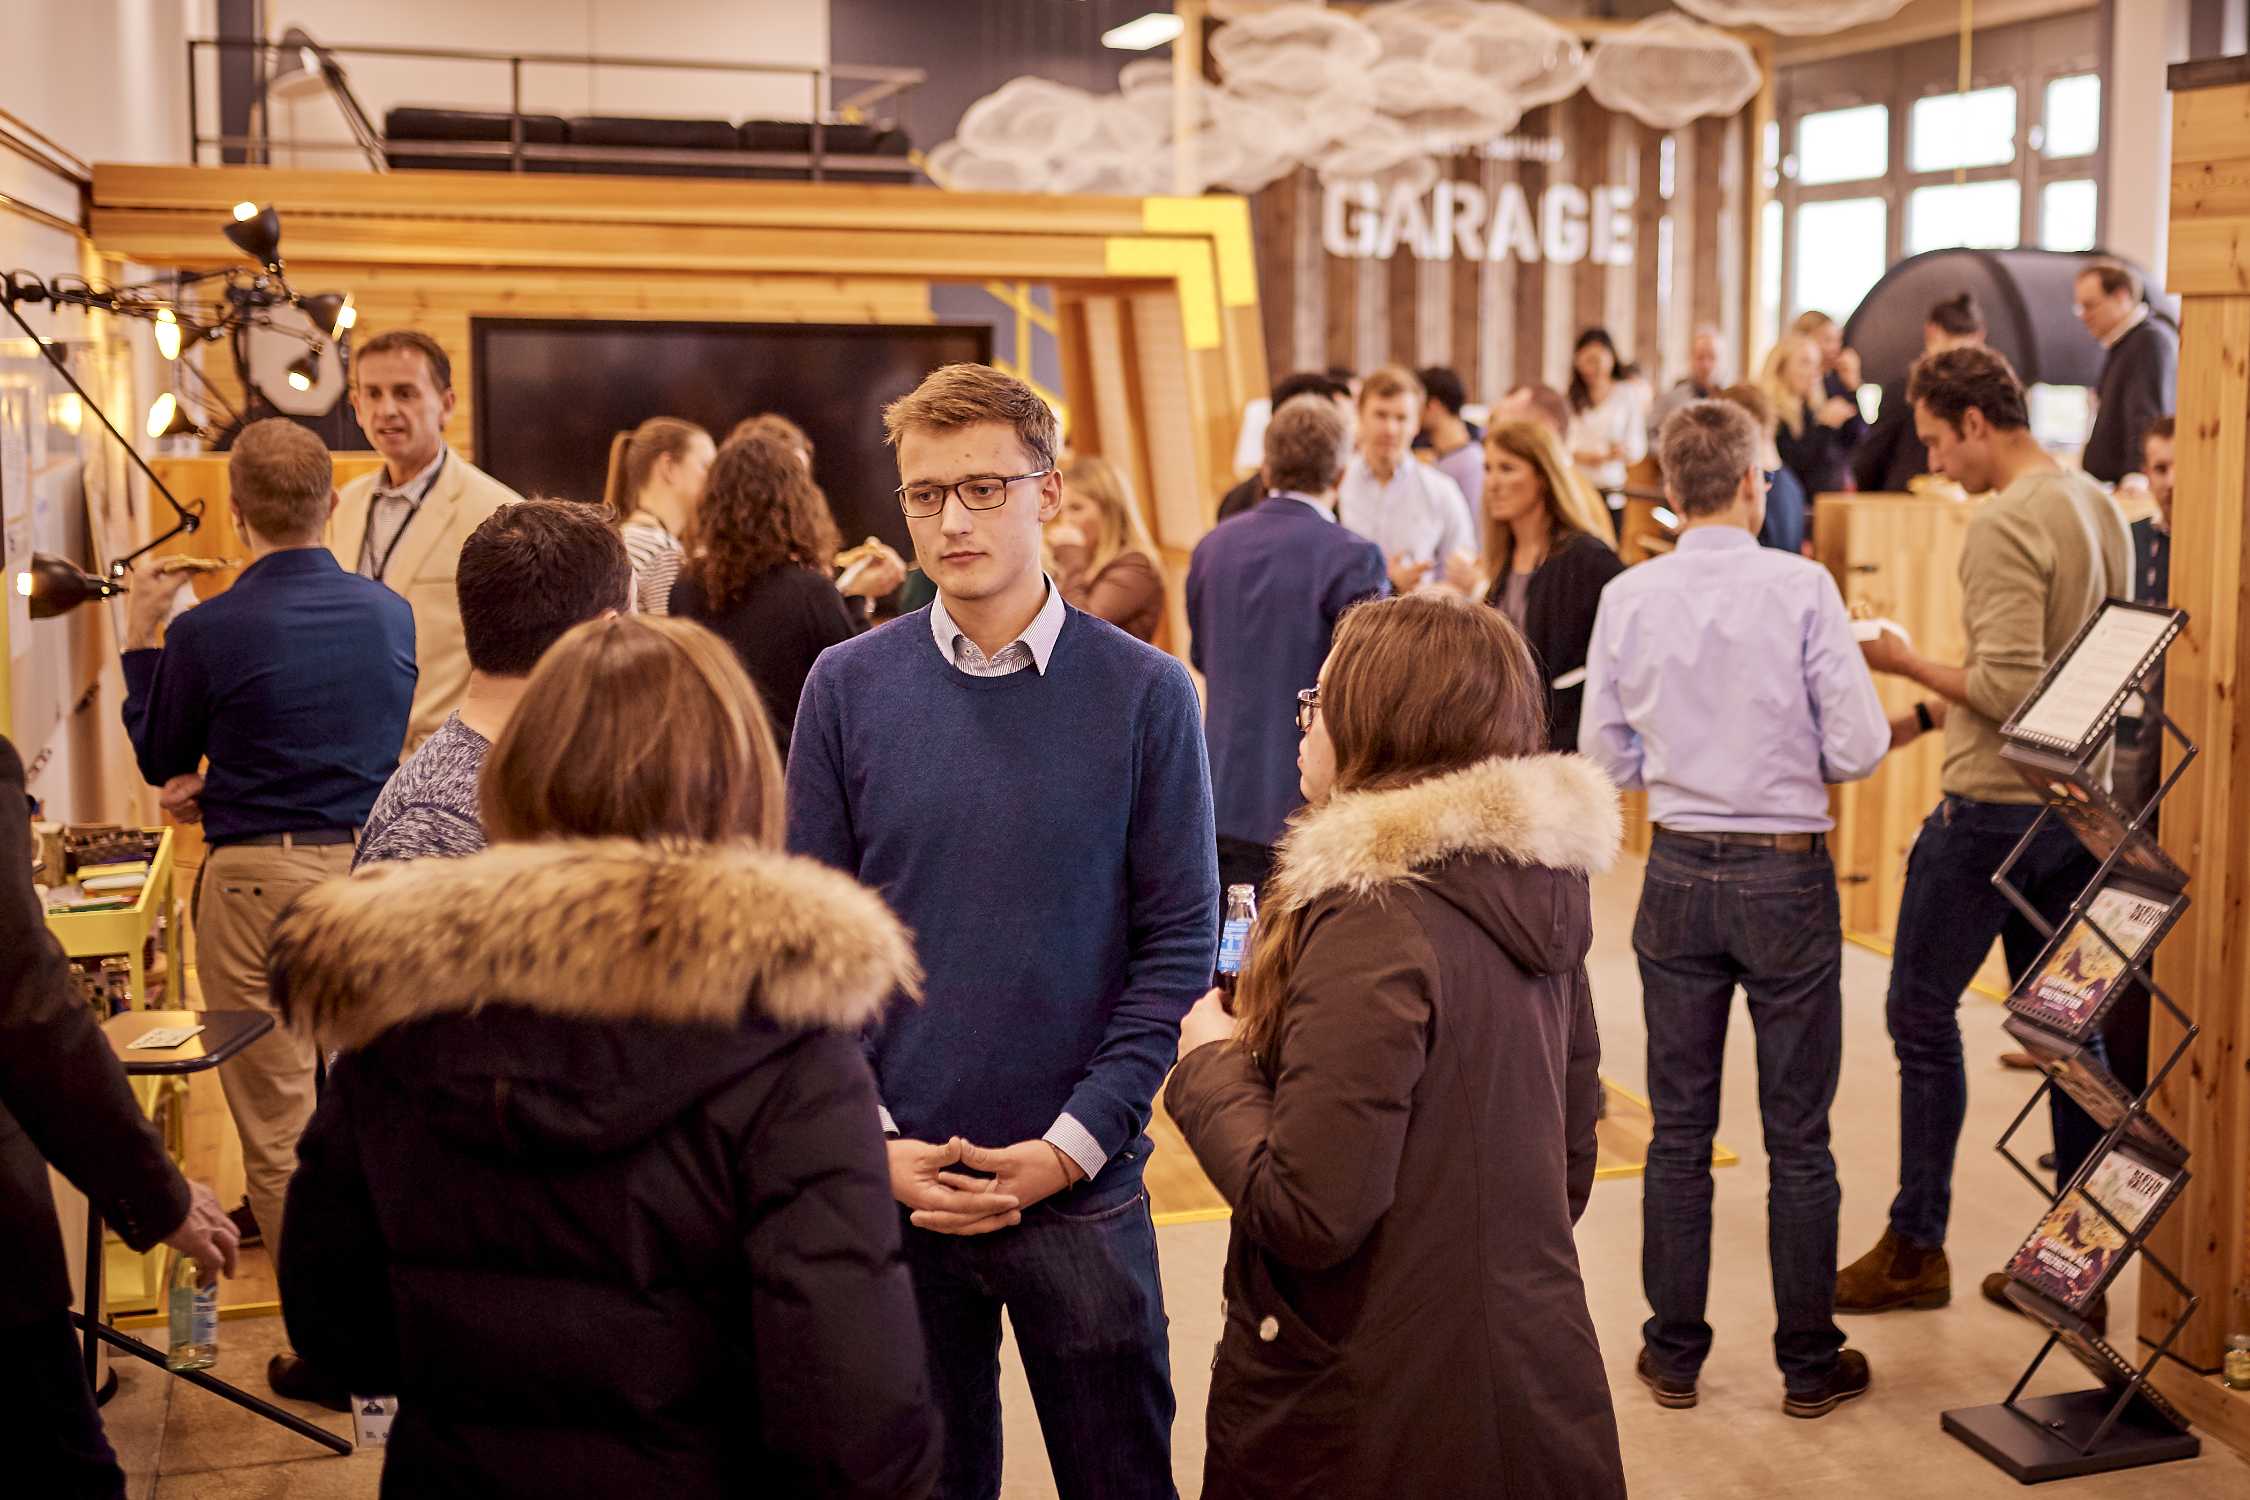 Deep Drive Days in the BMW Startup Garage (March 2019): Startups network with experts from the BMW Group in keynote speeches and workshop sessions.